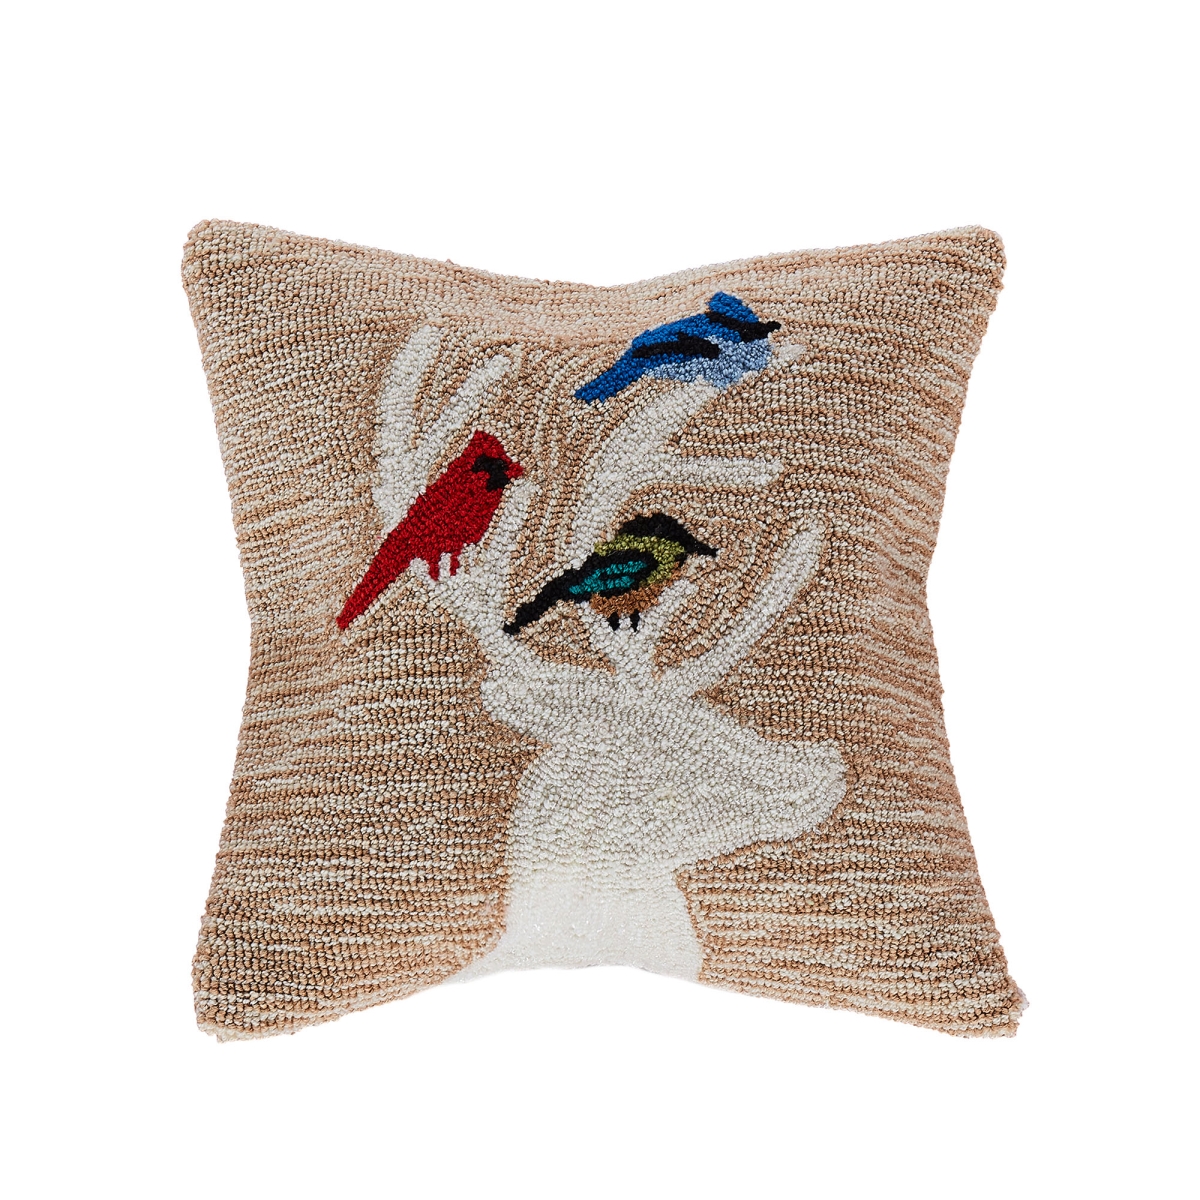 Trans-ocean Imports 7fp8s181912 18 In. Square Liora Manne Frontporch Deer & Friends Indoor & Outdoor Pillow - Natural